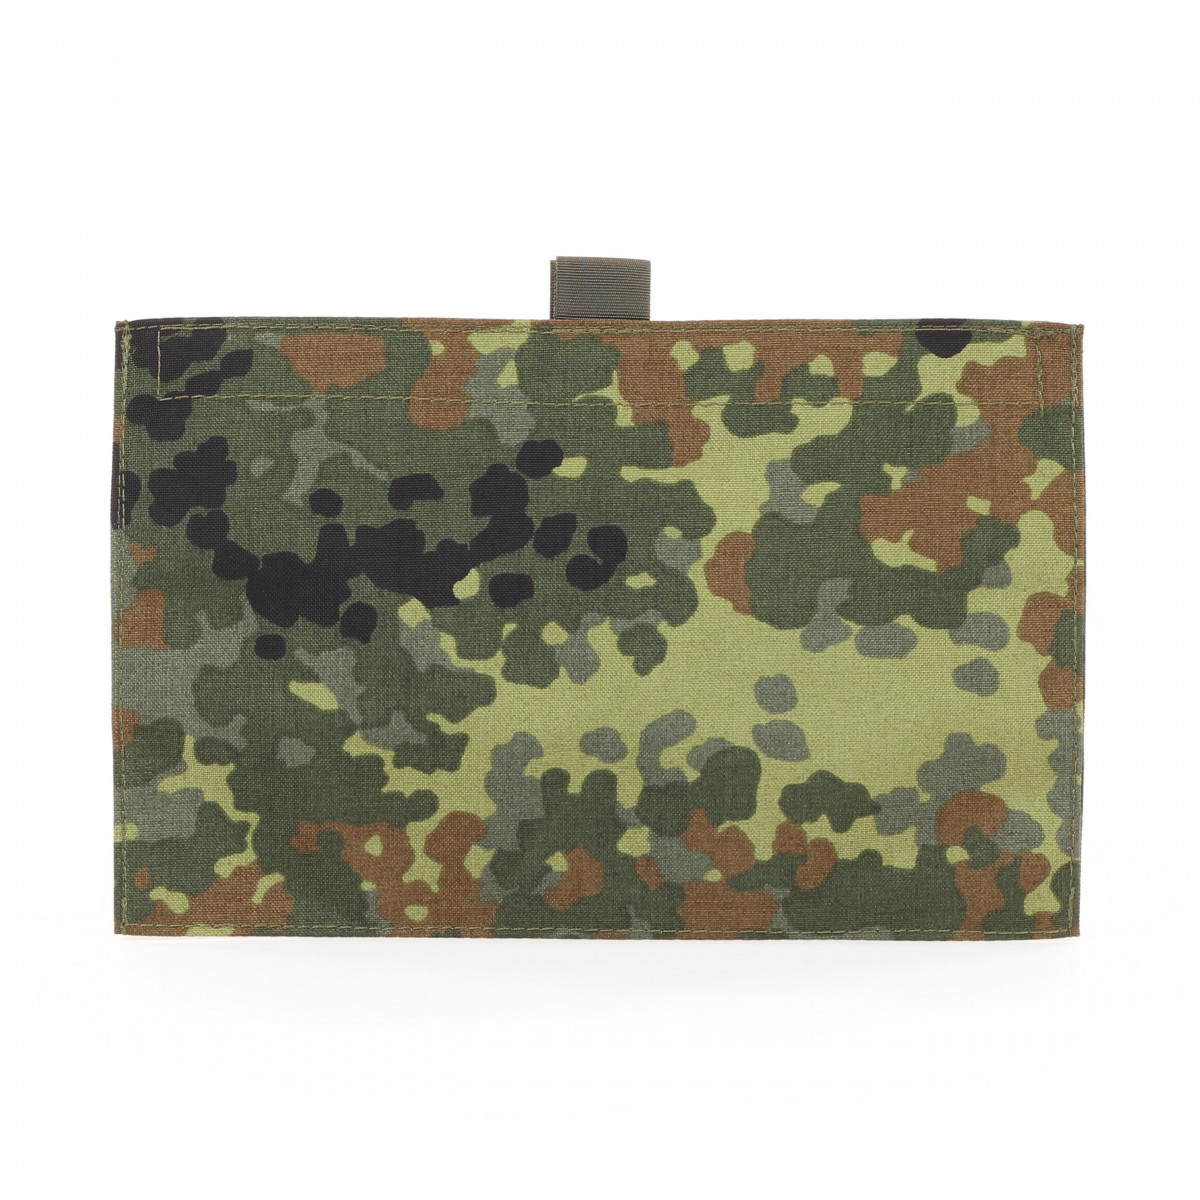 Micro Battle Chest Rig Back Cover Pouch Flecktarn